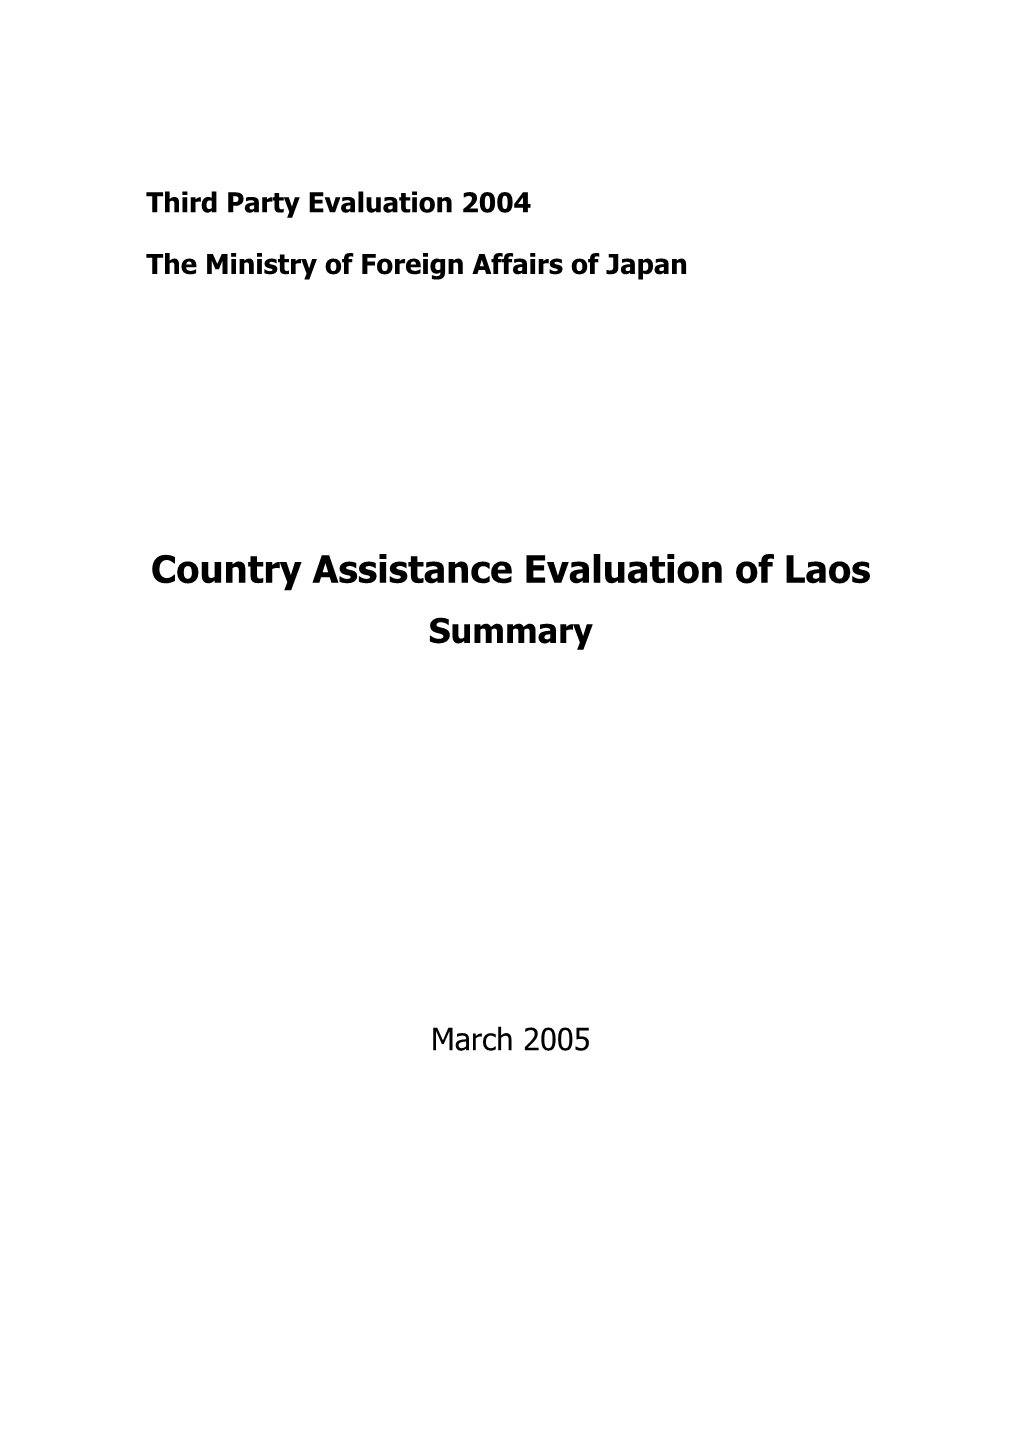 Country Assistance Evaluation of Laos Summary